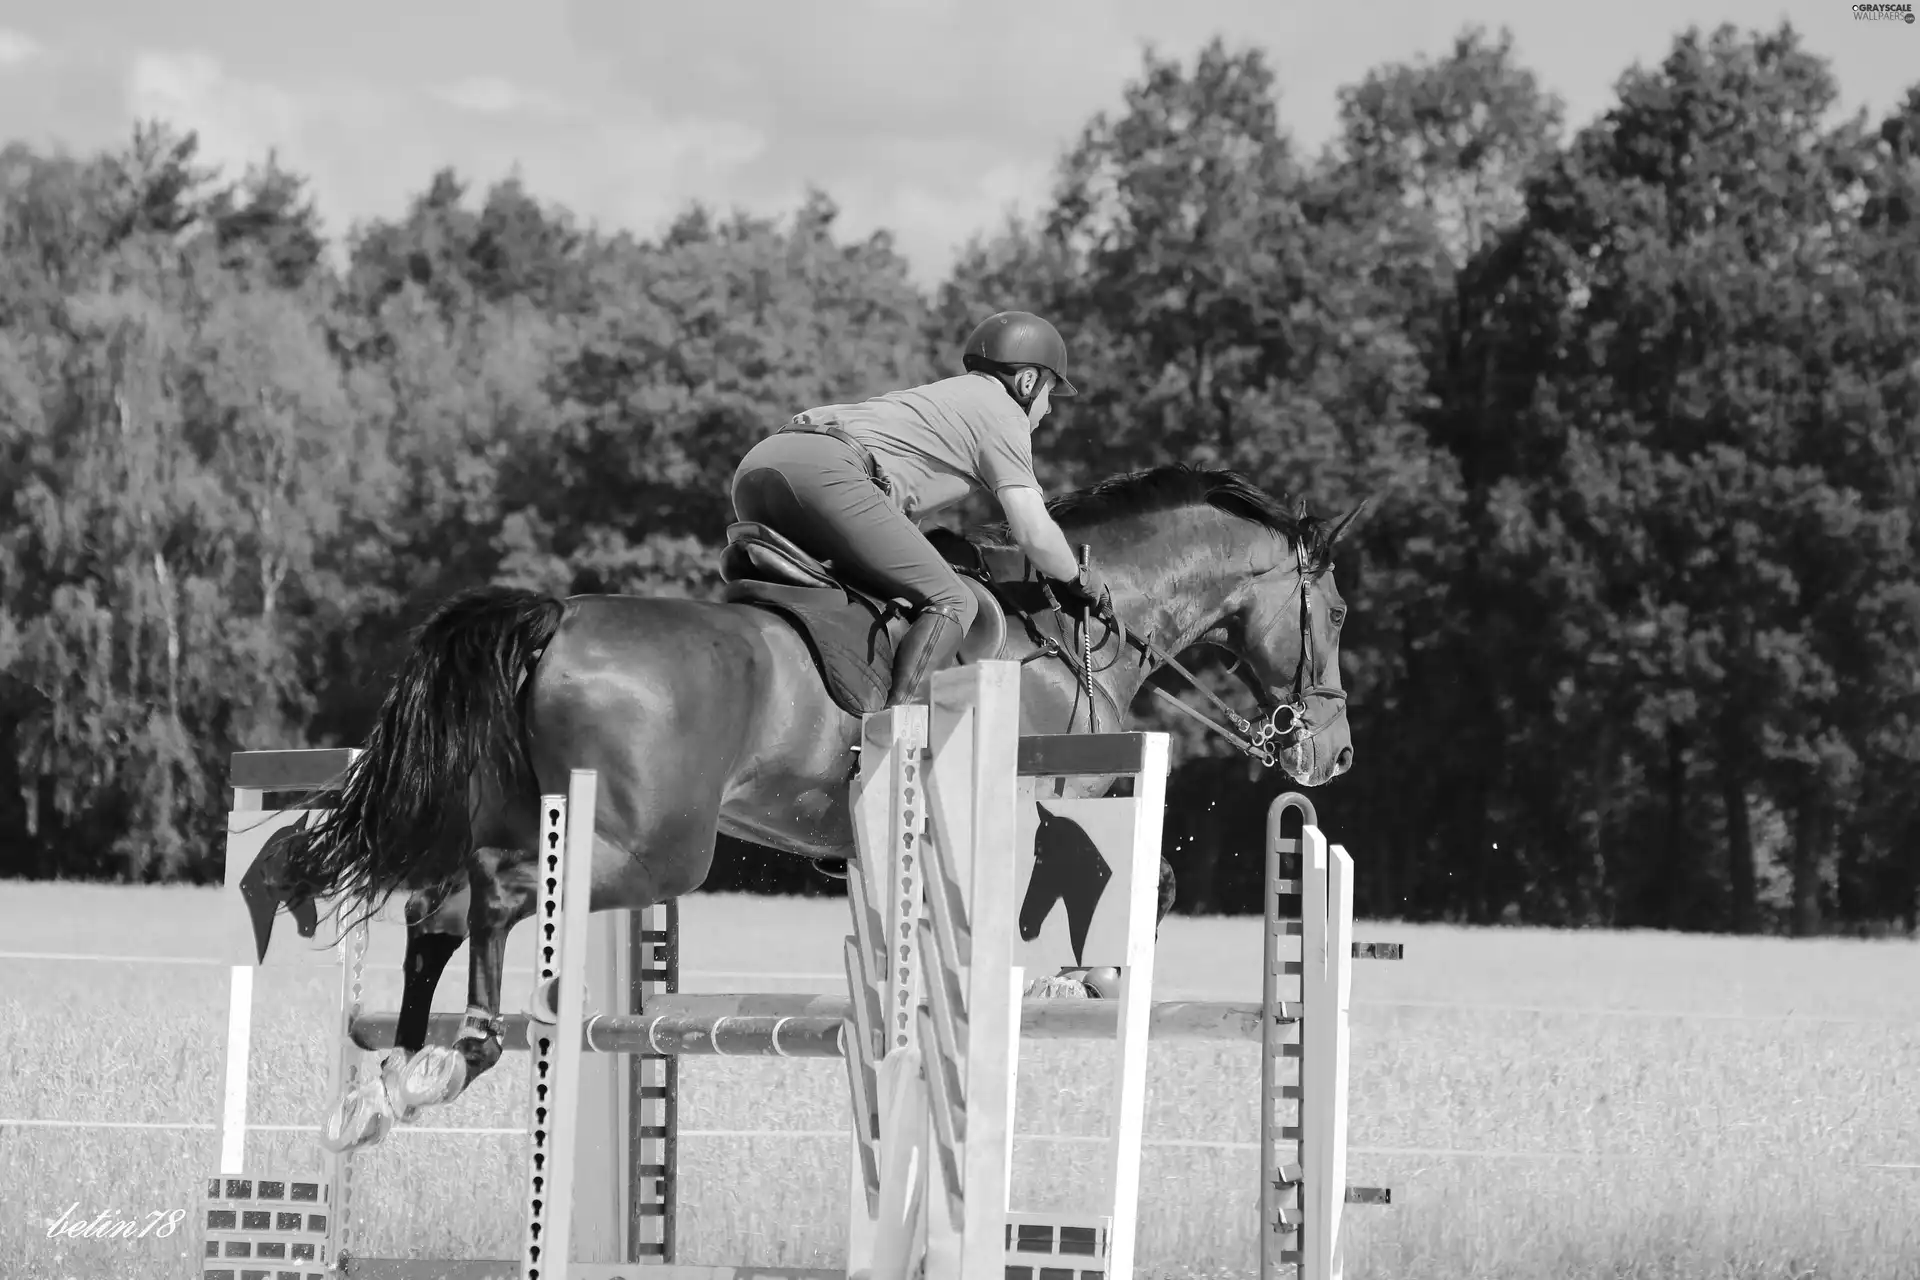 rider, training, obstacle, Sport, jump, Horse